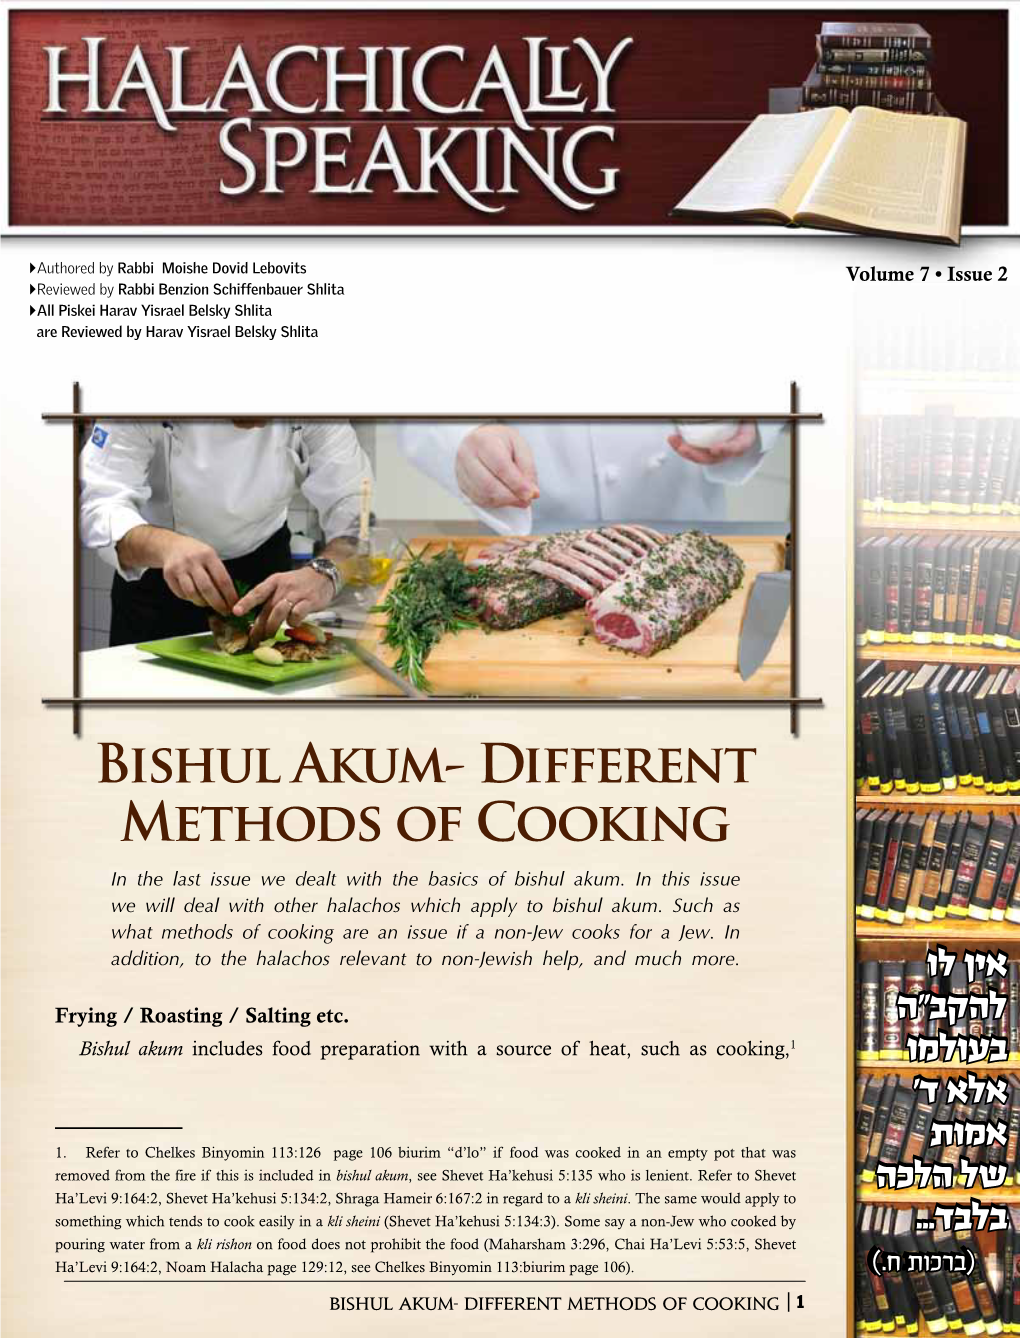 Bishul Akum- Different Methods of Cooking in the Last Issue We Dealt with the Basics of Bishul Akum